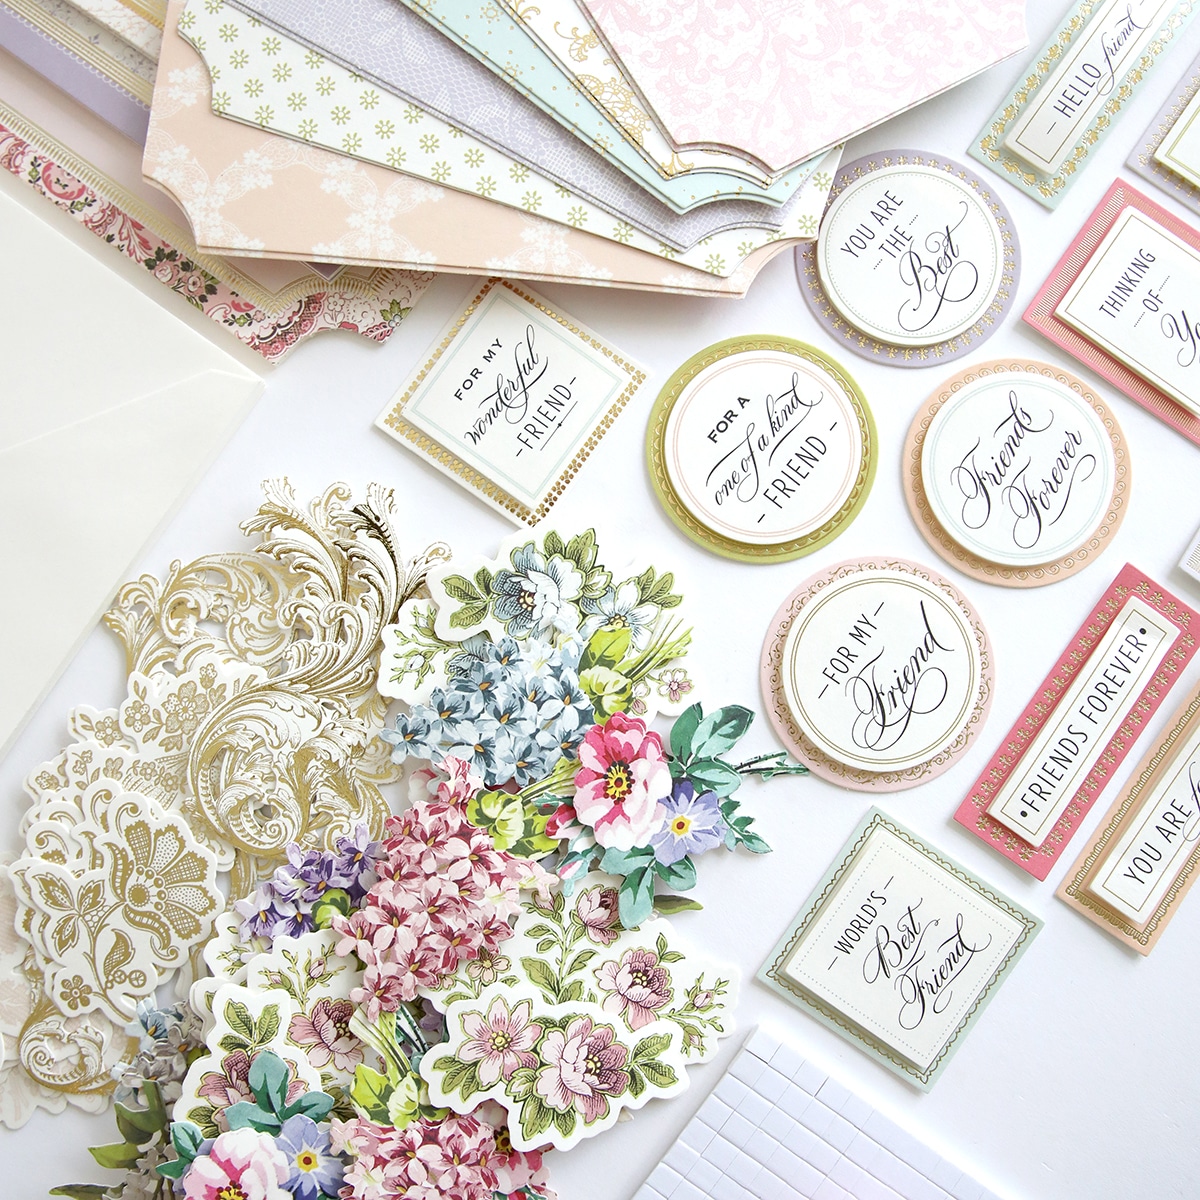 The Simply Friendship Card Making Kit and papers are laid out on a table.